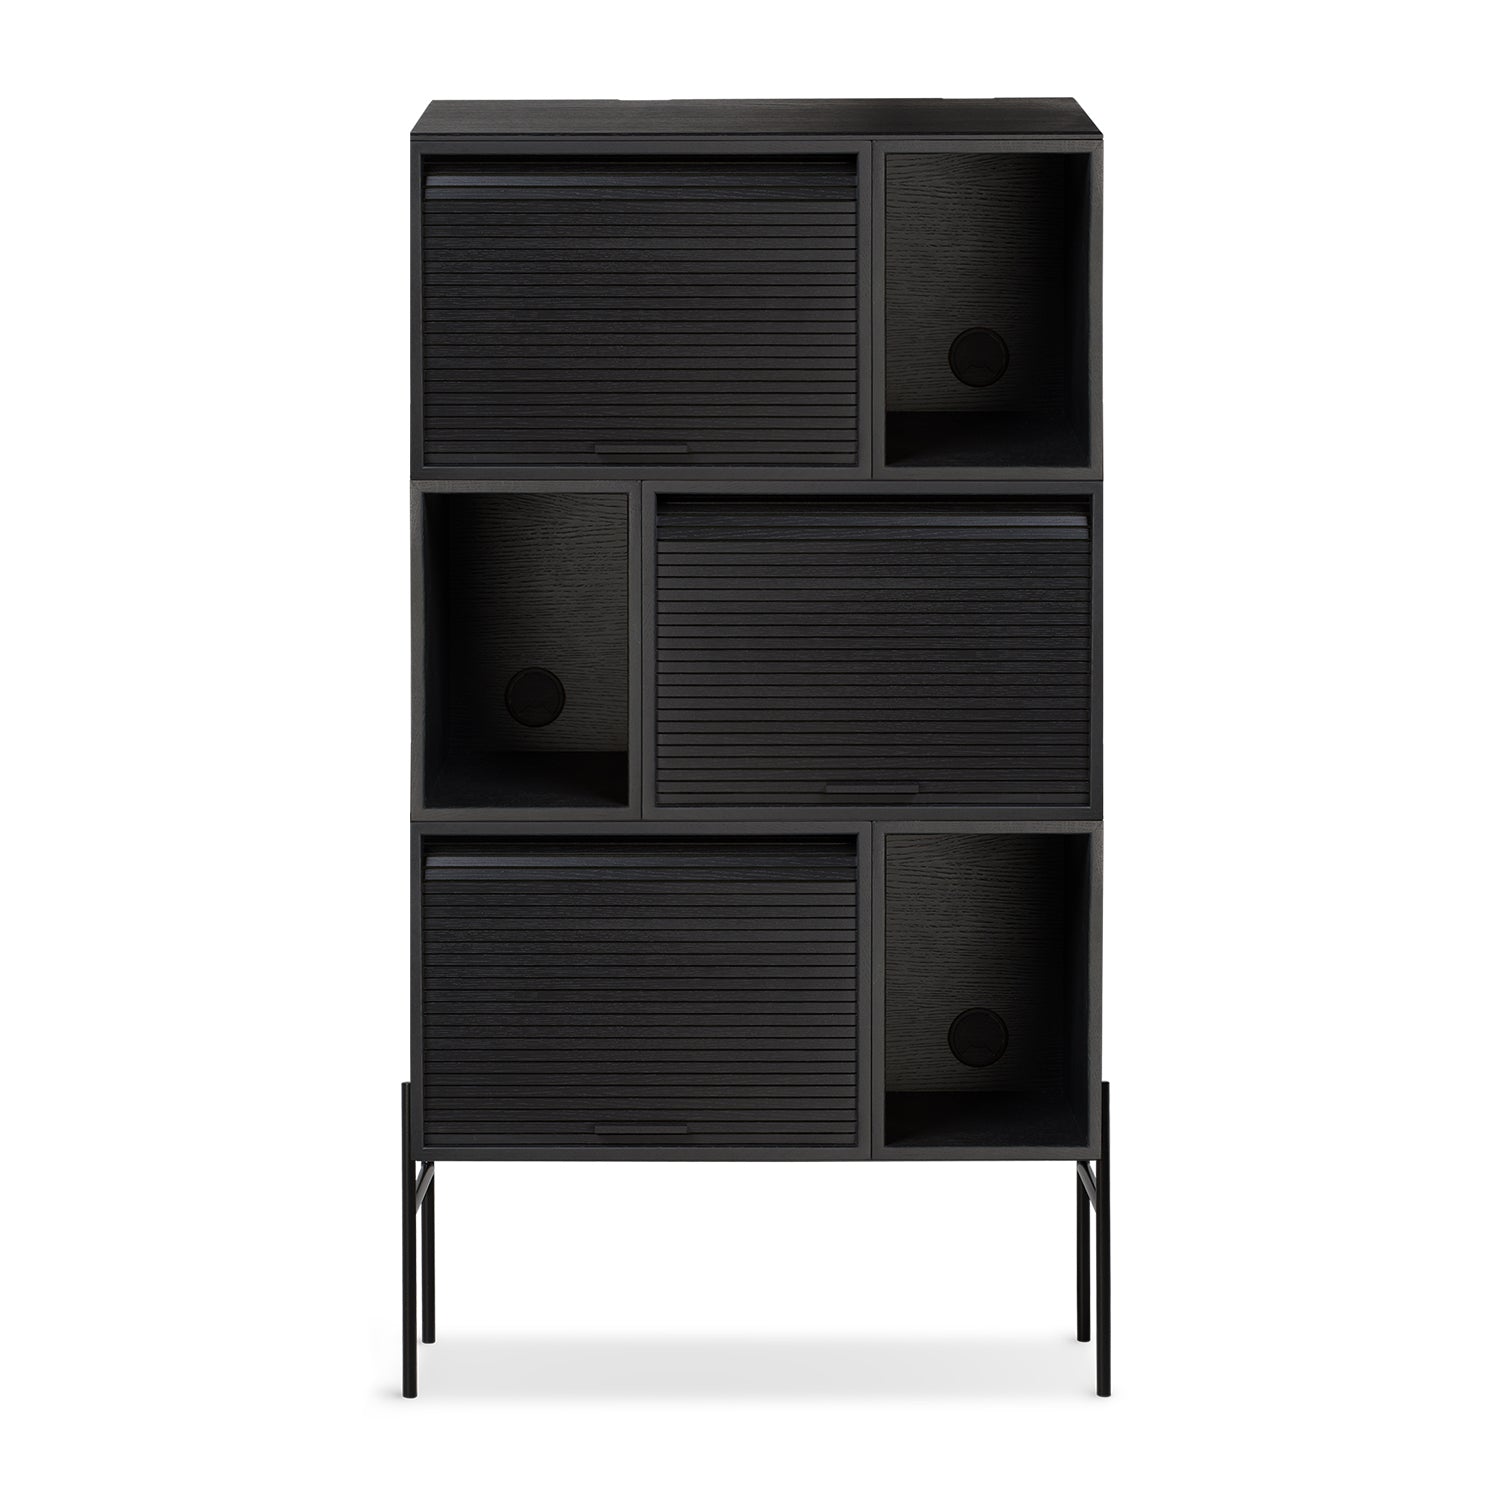 Hifive Tall Cabinet - The Design Choice